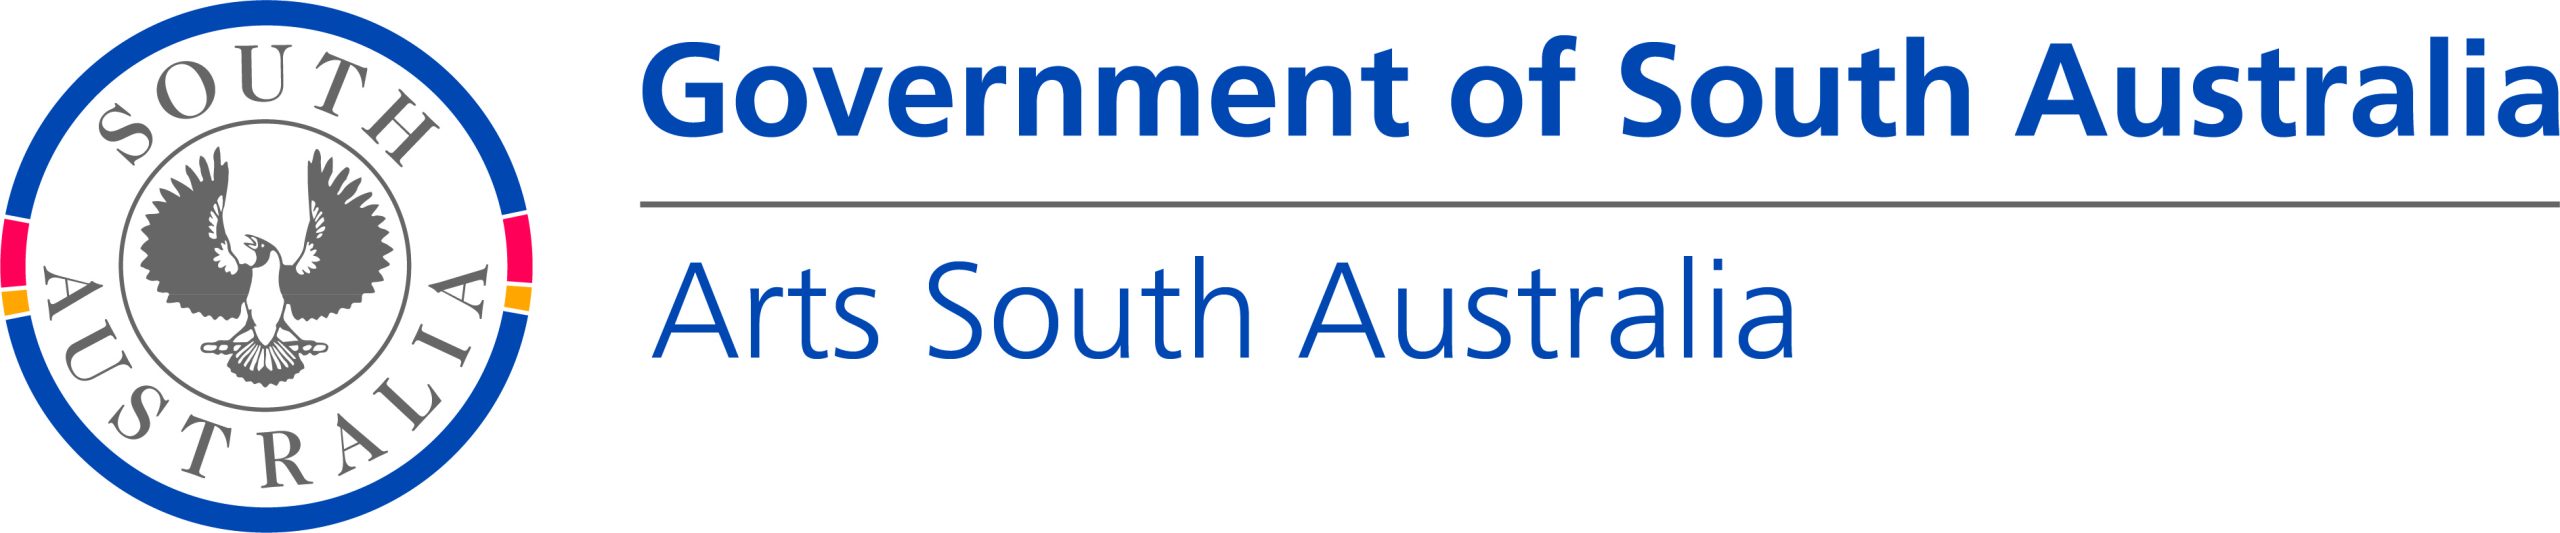 Government of South Australia logo for Arts South Australia - blue text on the right of a round crest with a graphic of a piping shriek in the centre